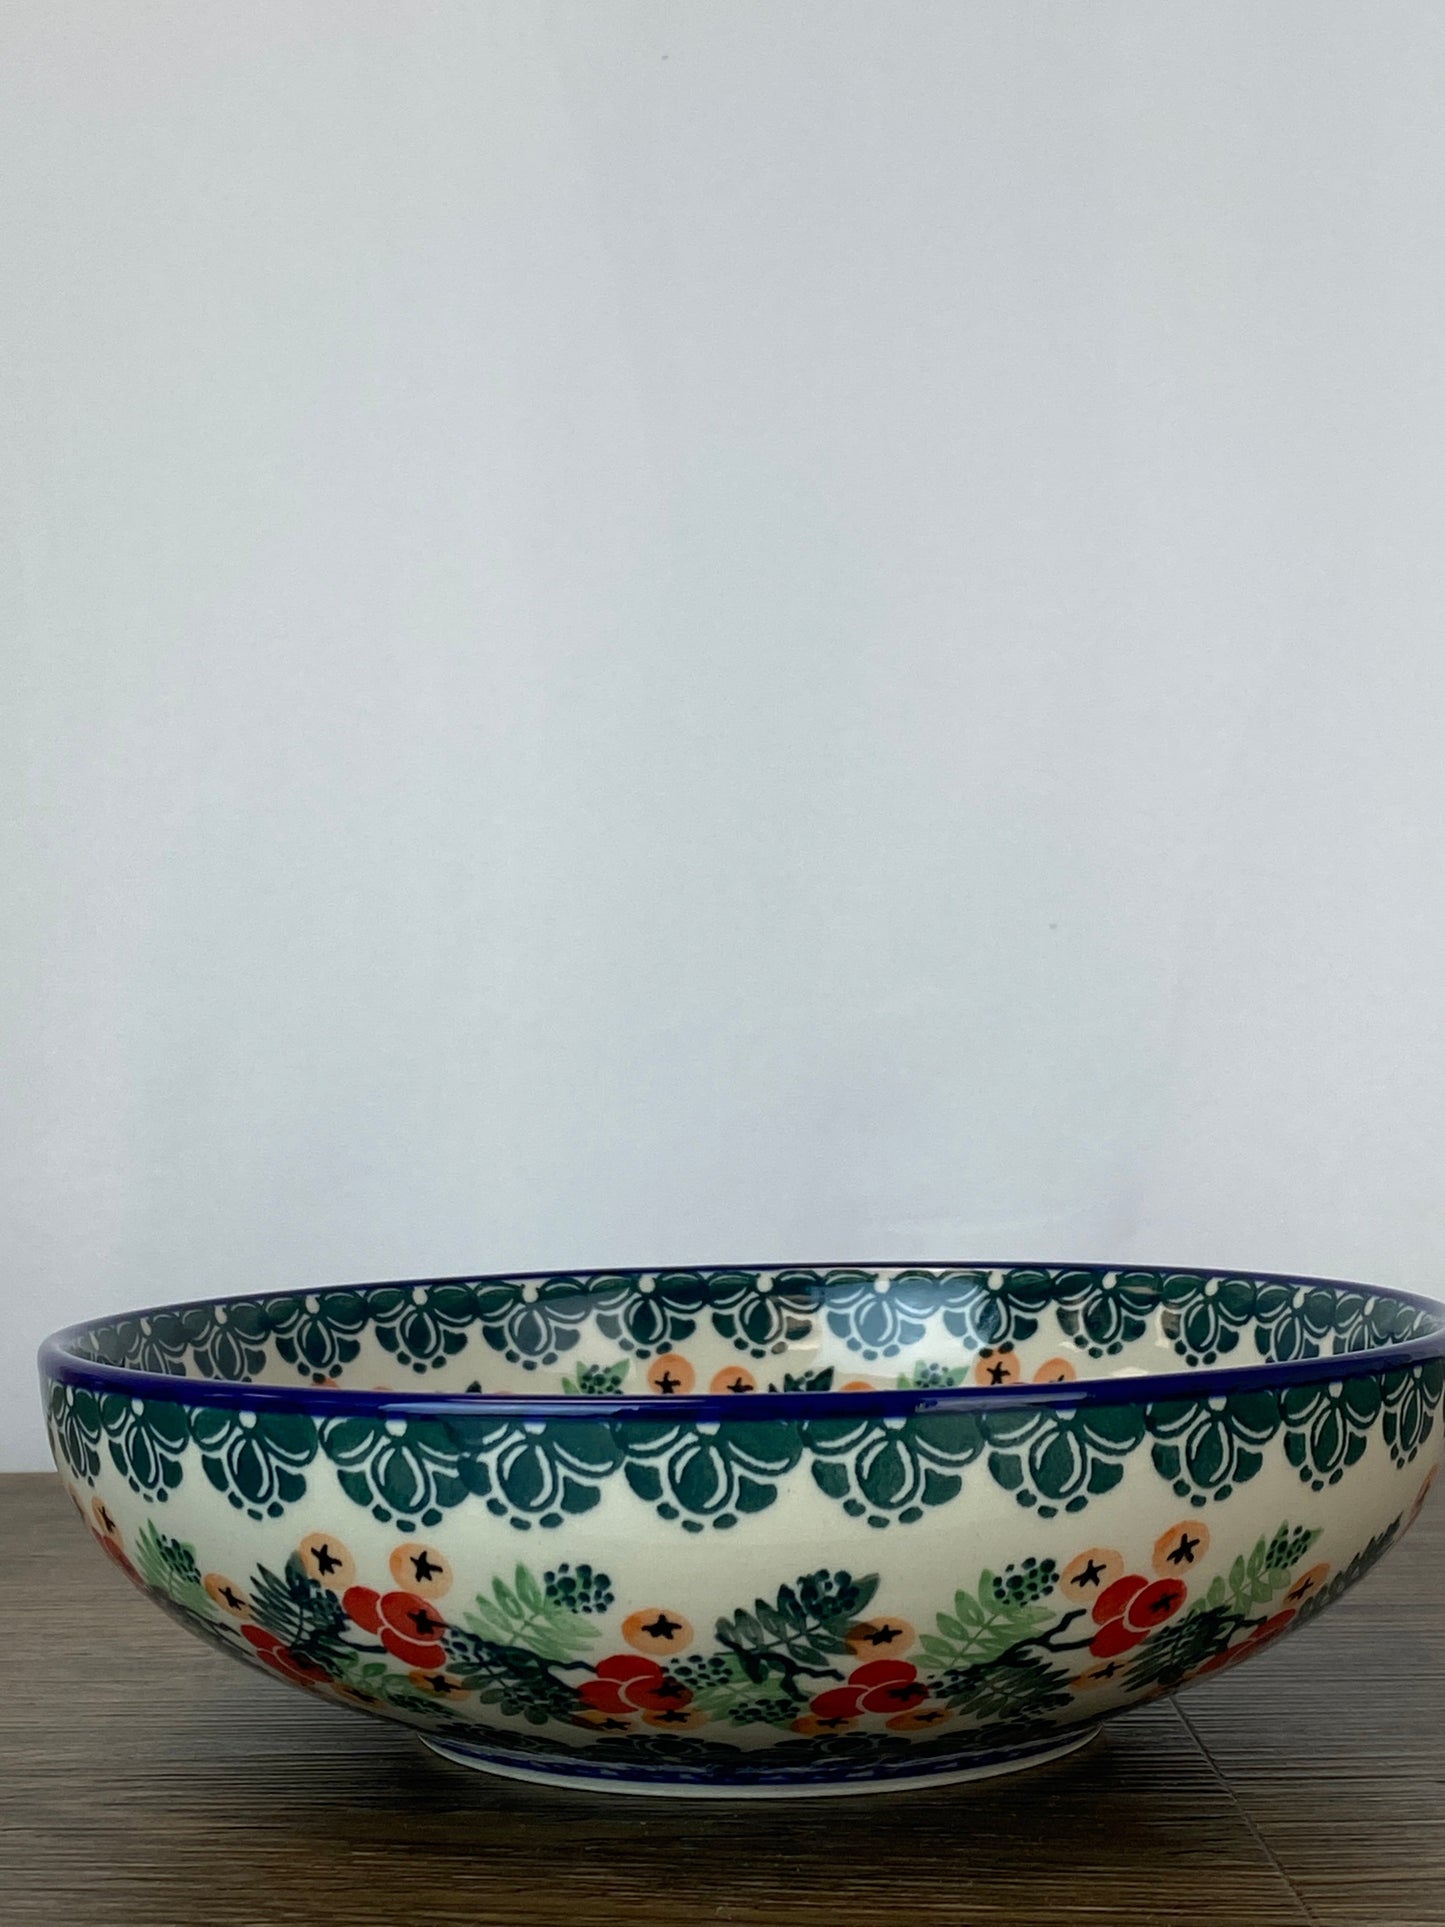 SALE HOLIDAY SPECIAL 8.5" Serving Bowl - Shape B91 - Pattern 1414